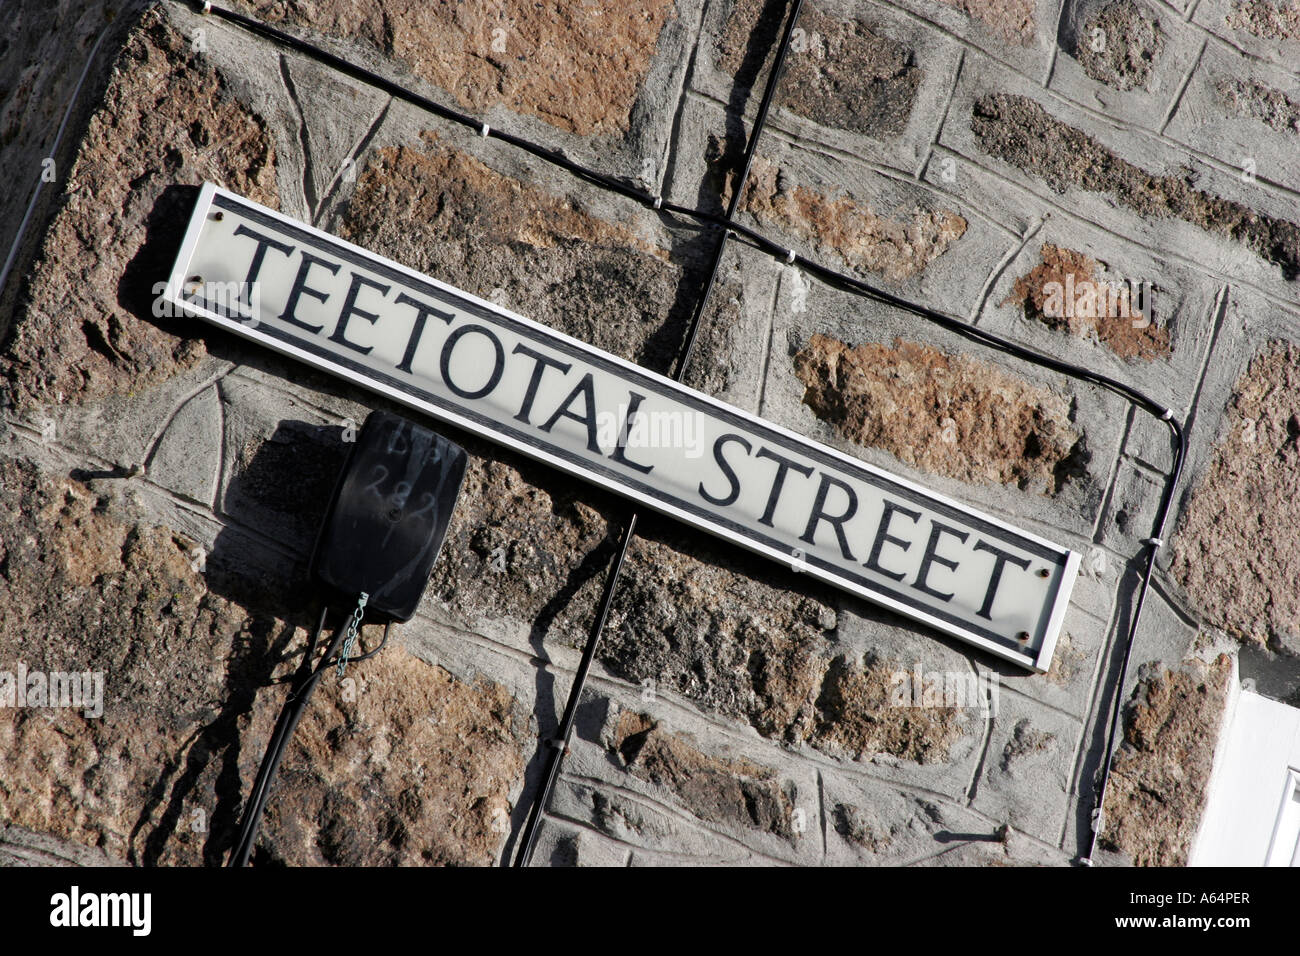 Teetotal Street, road sign in St Ives in Cornwall Stock Photo